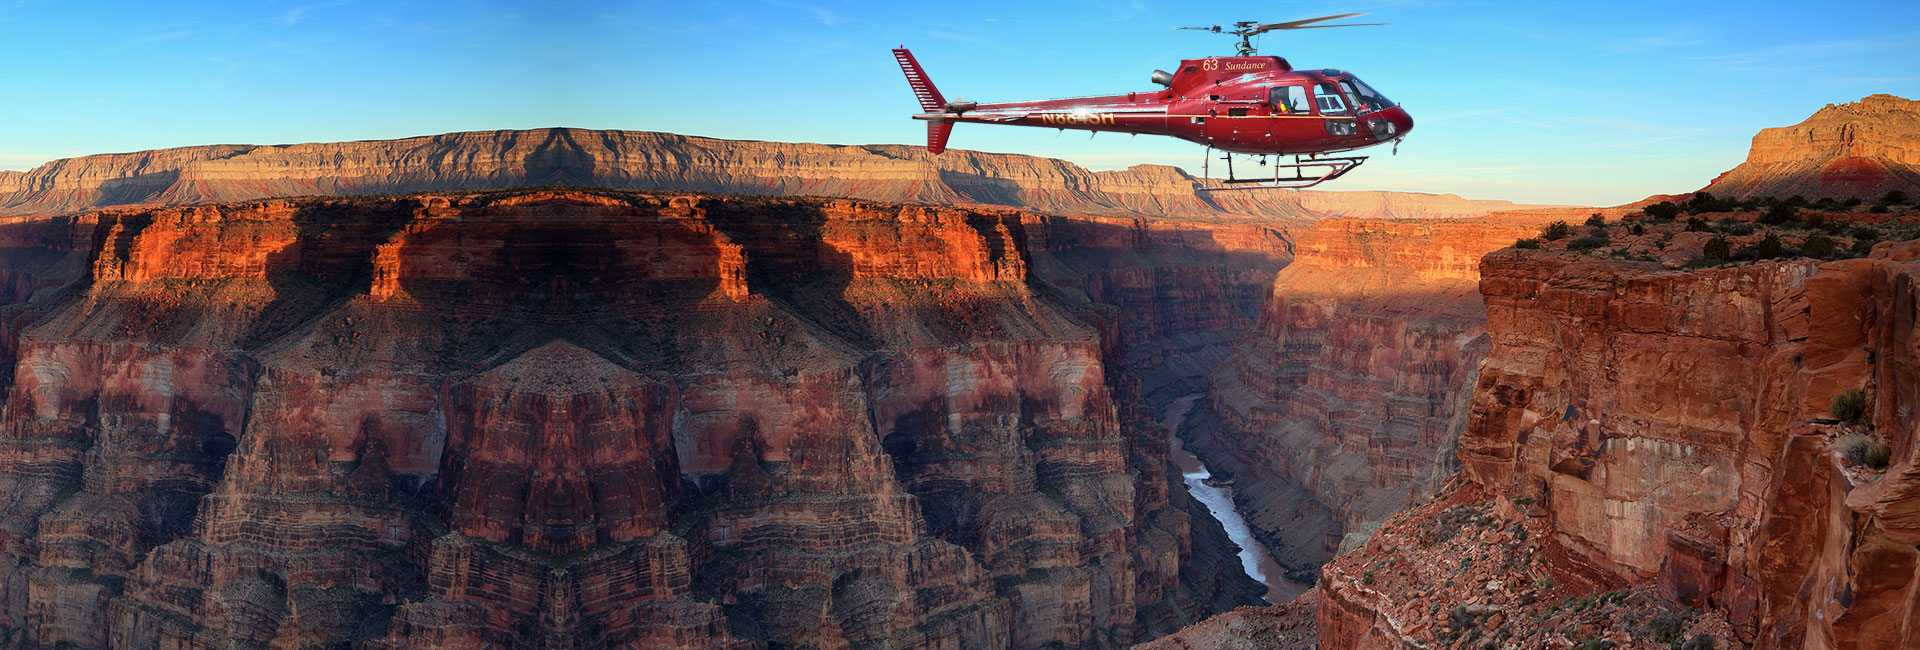 Sundance Helicopters Announces Implementation of Ramco Aviation Software